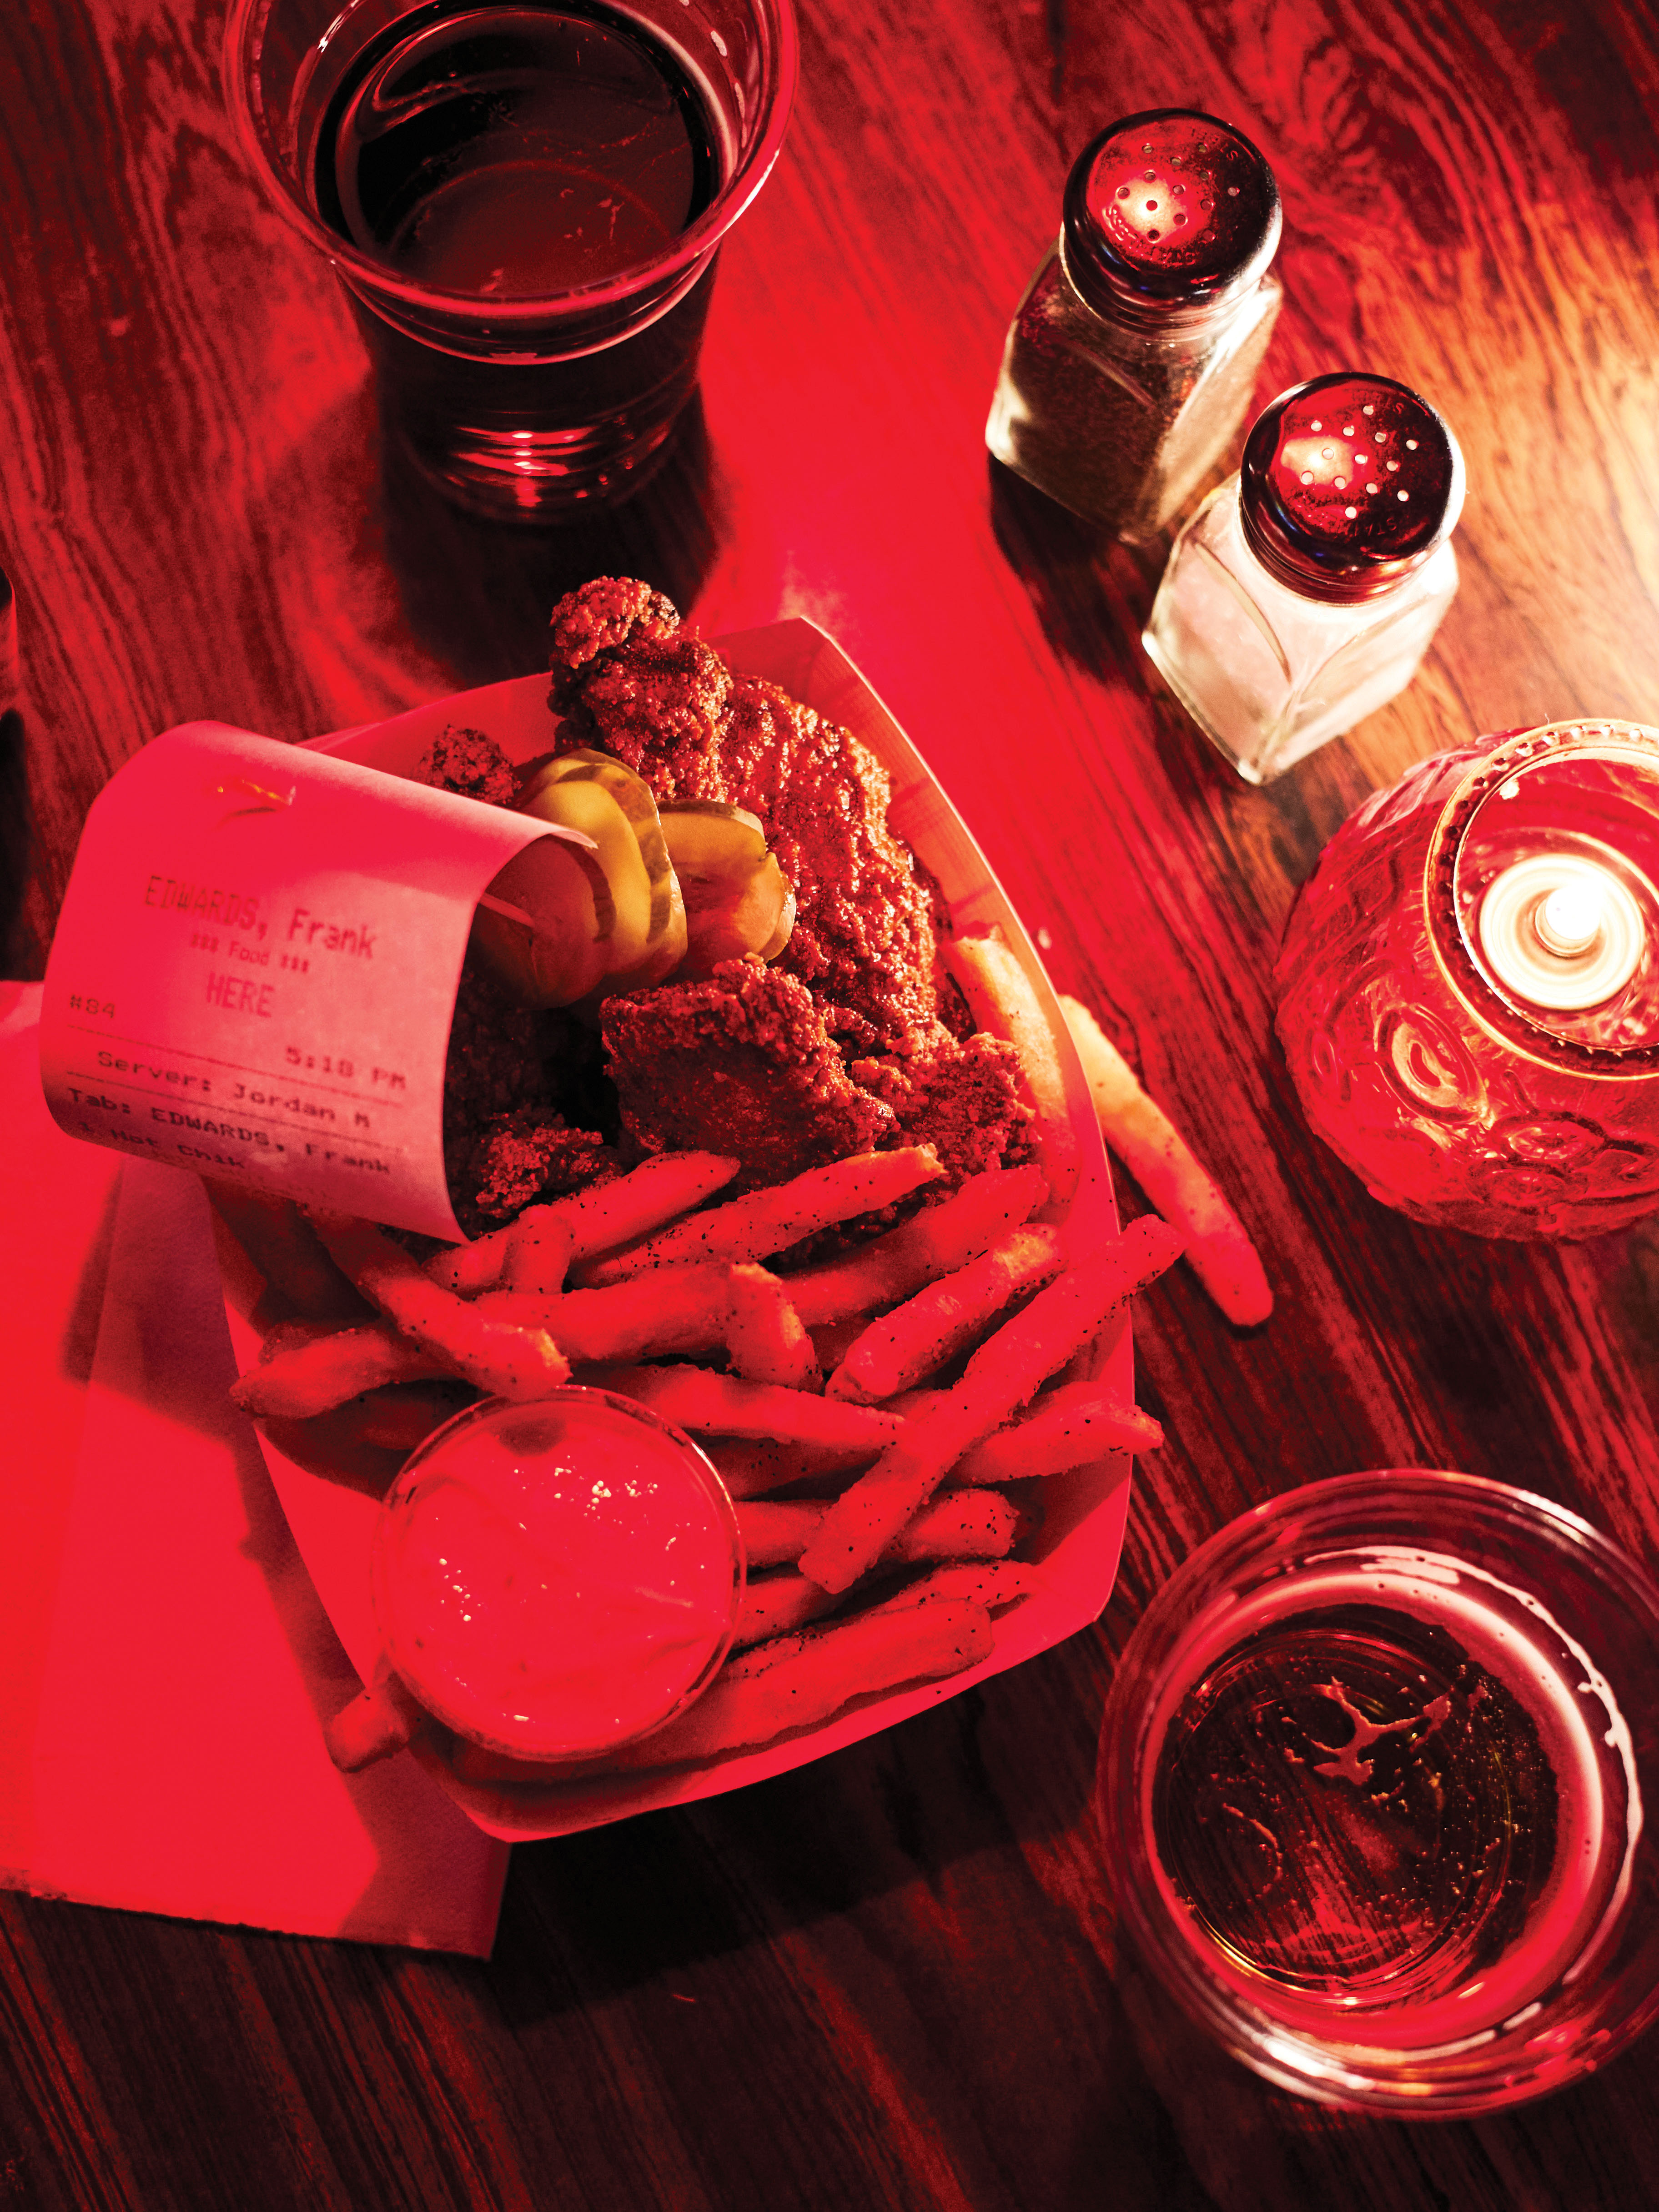 The hot chicken, fries, and beer at Dino’s.